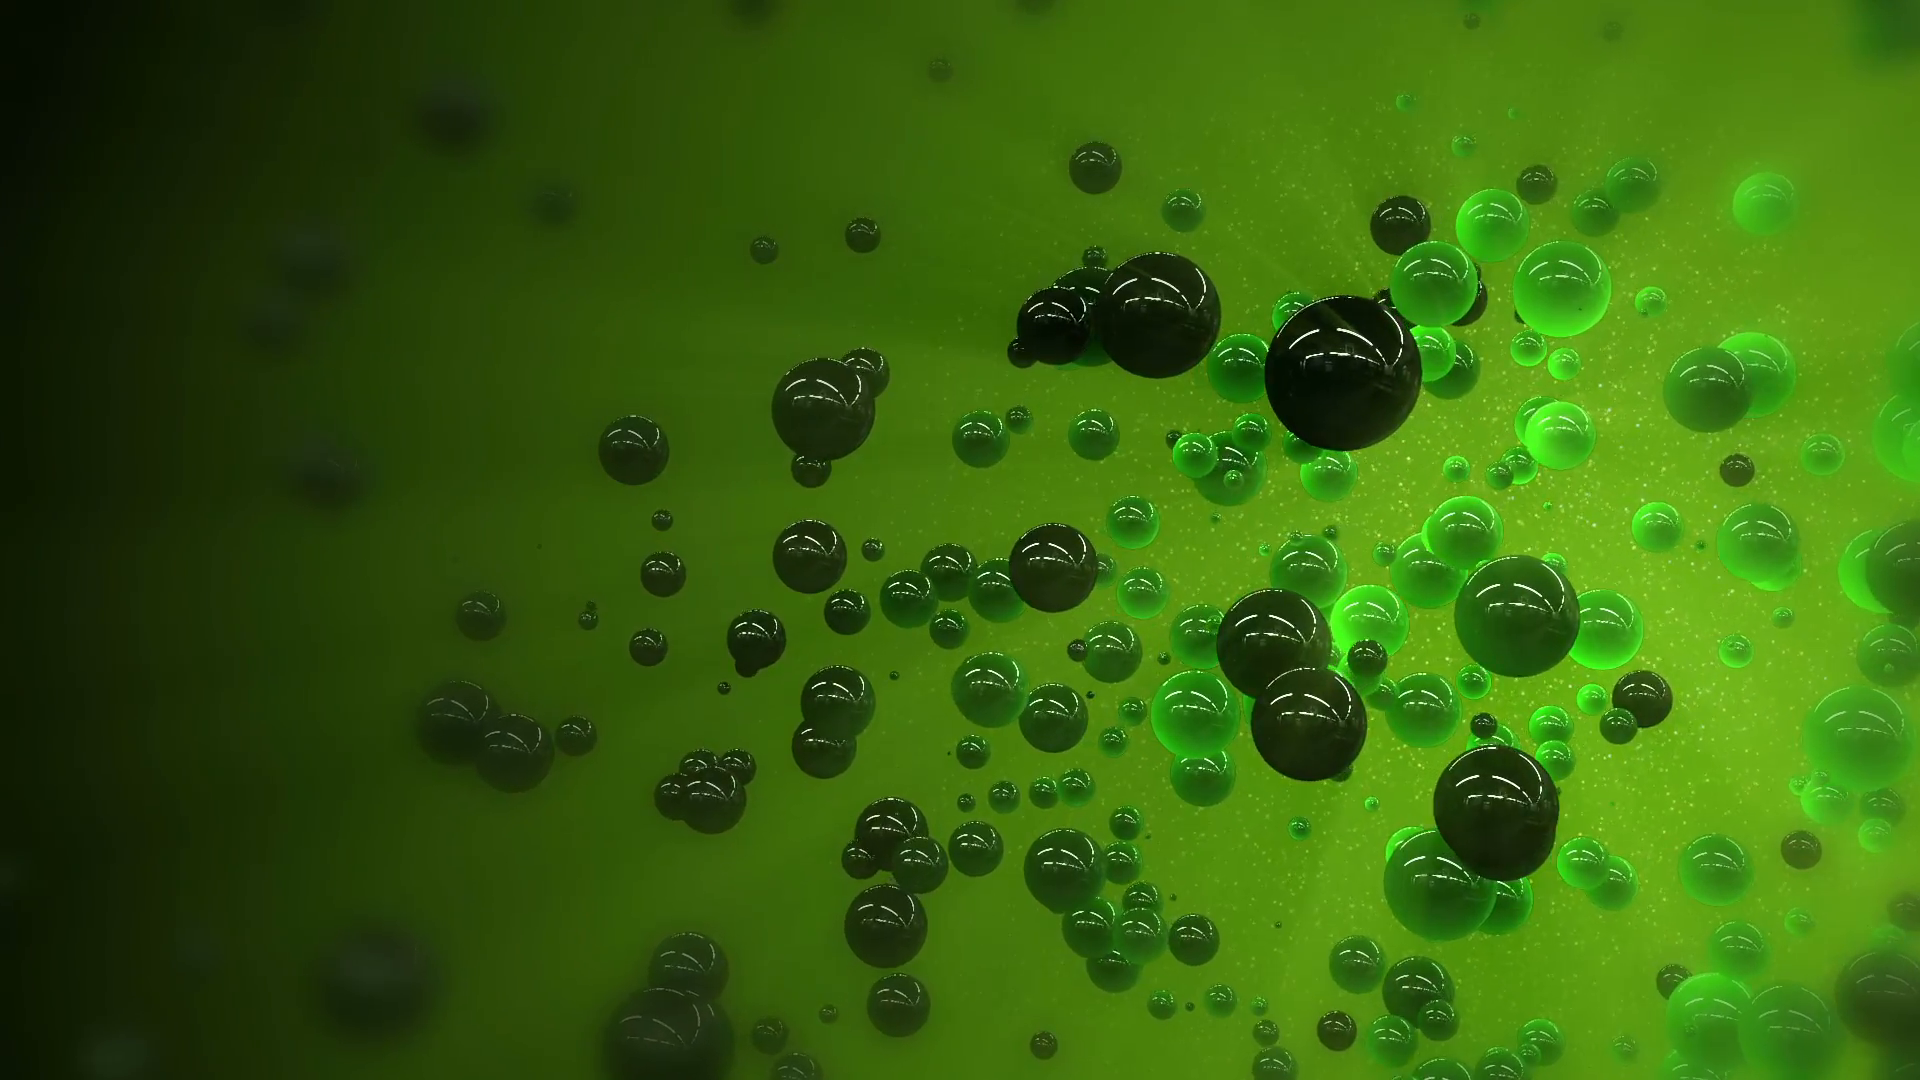 Abstract green organic liquid or glass bubble particles evolving ...